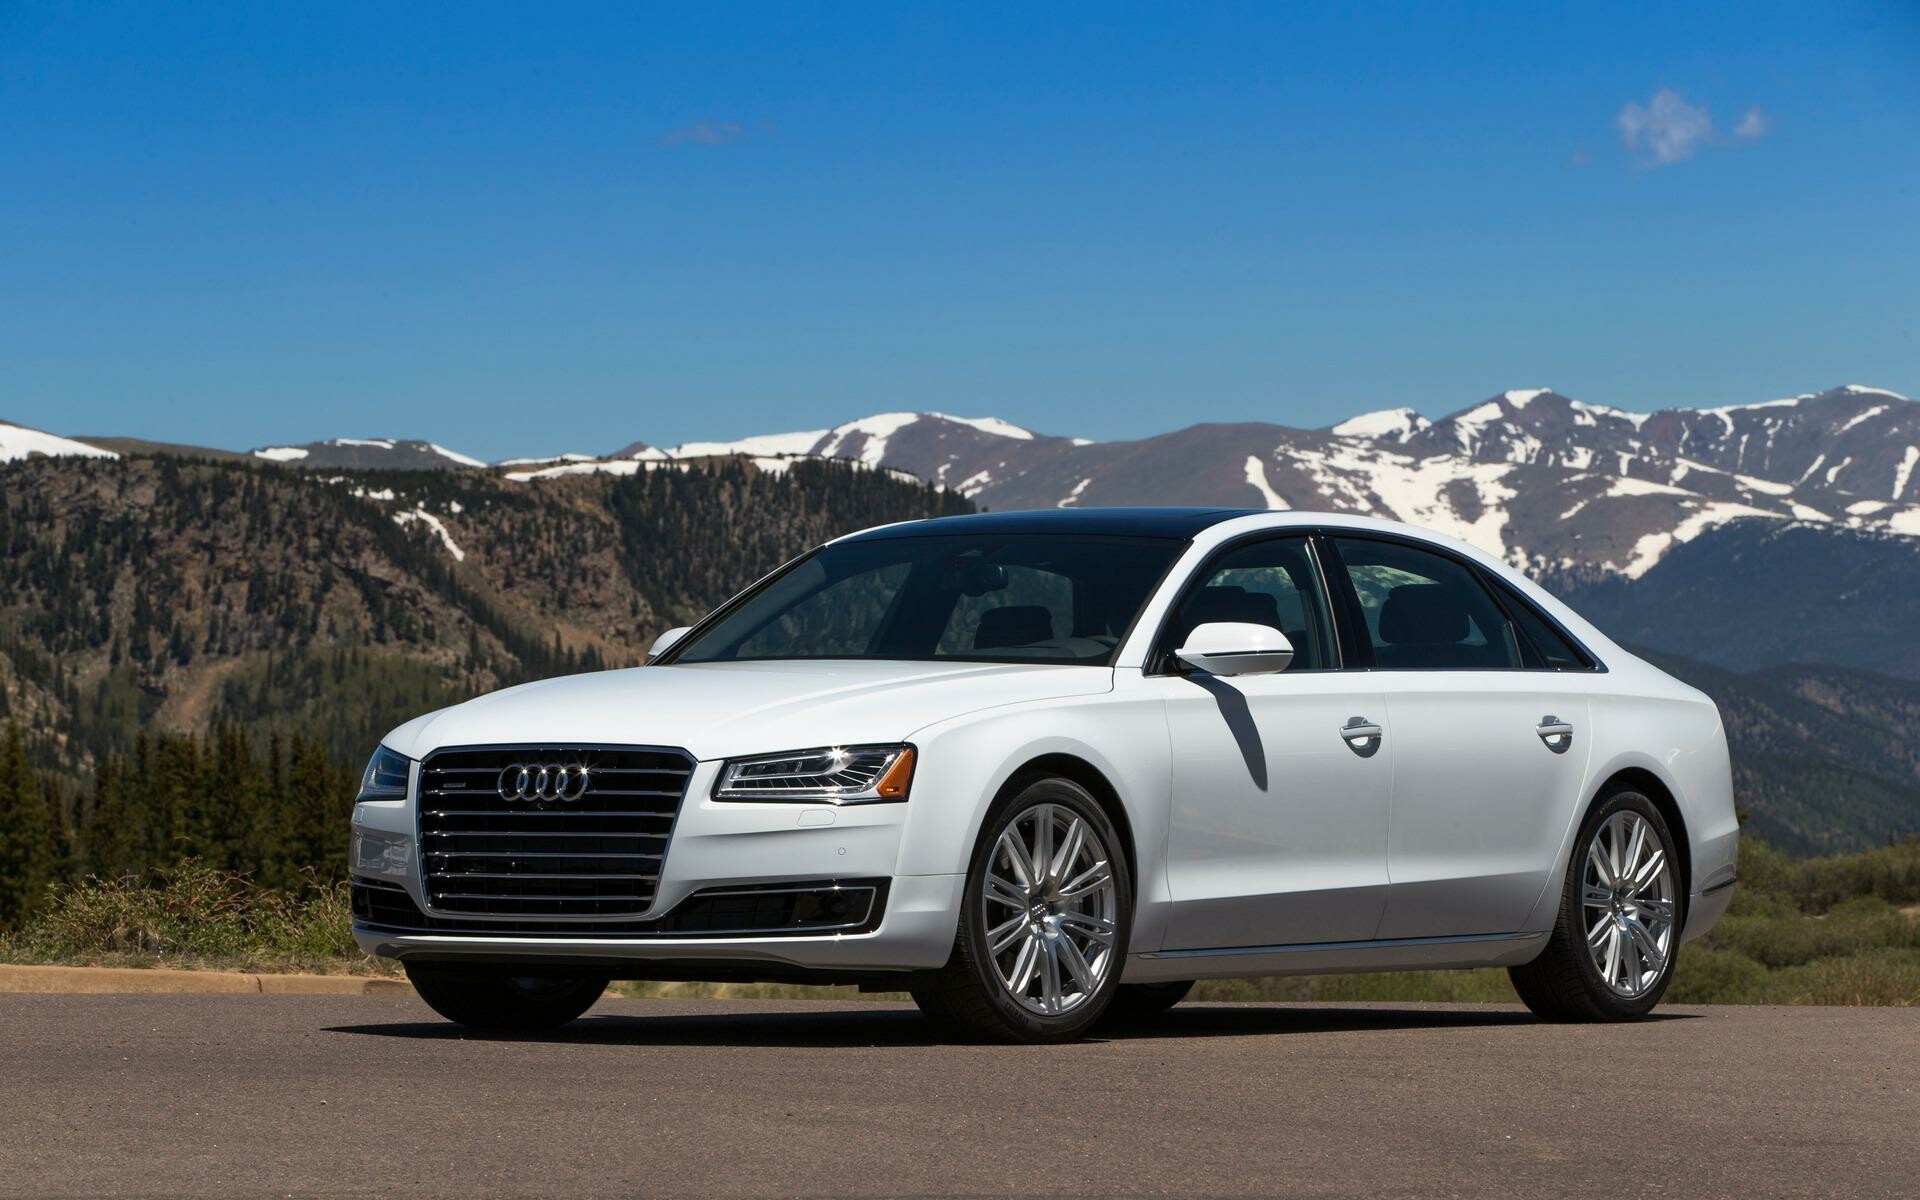 Audi A8: Sedans, Positioned as the range-topping sibling to the A3, A4, and A6. 1920x1200 HD Wallpaper.